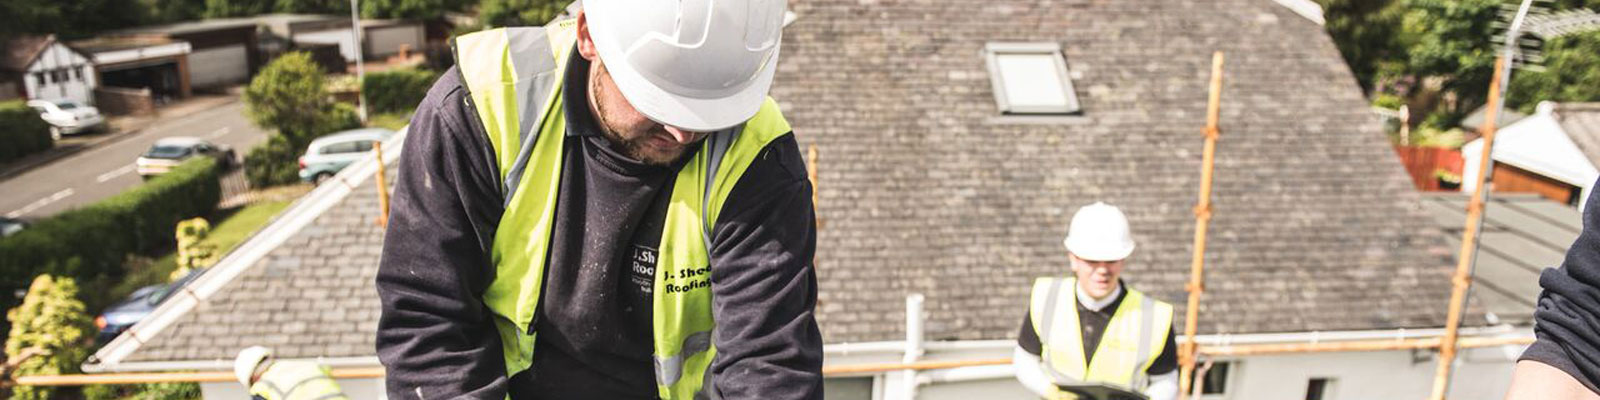 Roofing Services across Glasgow